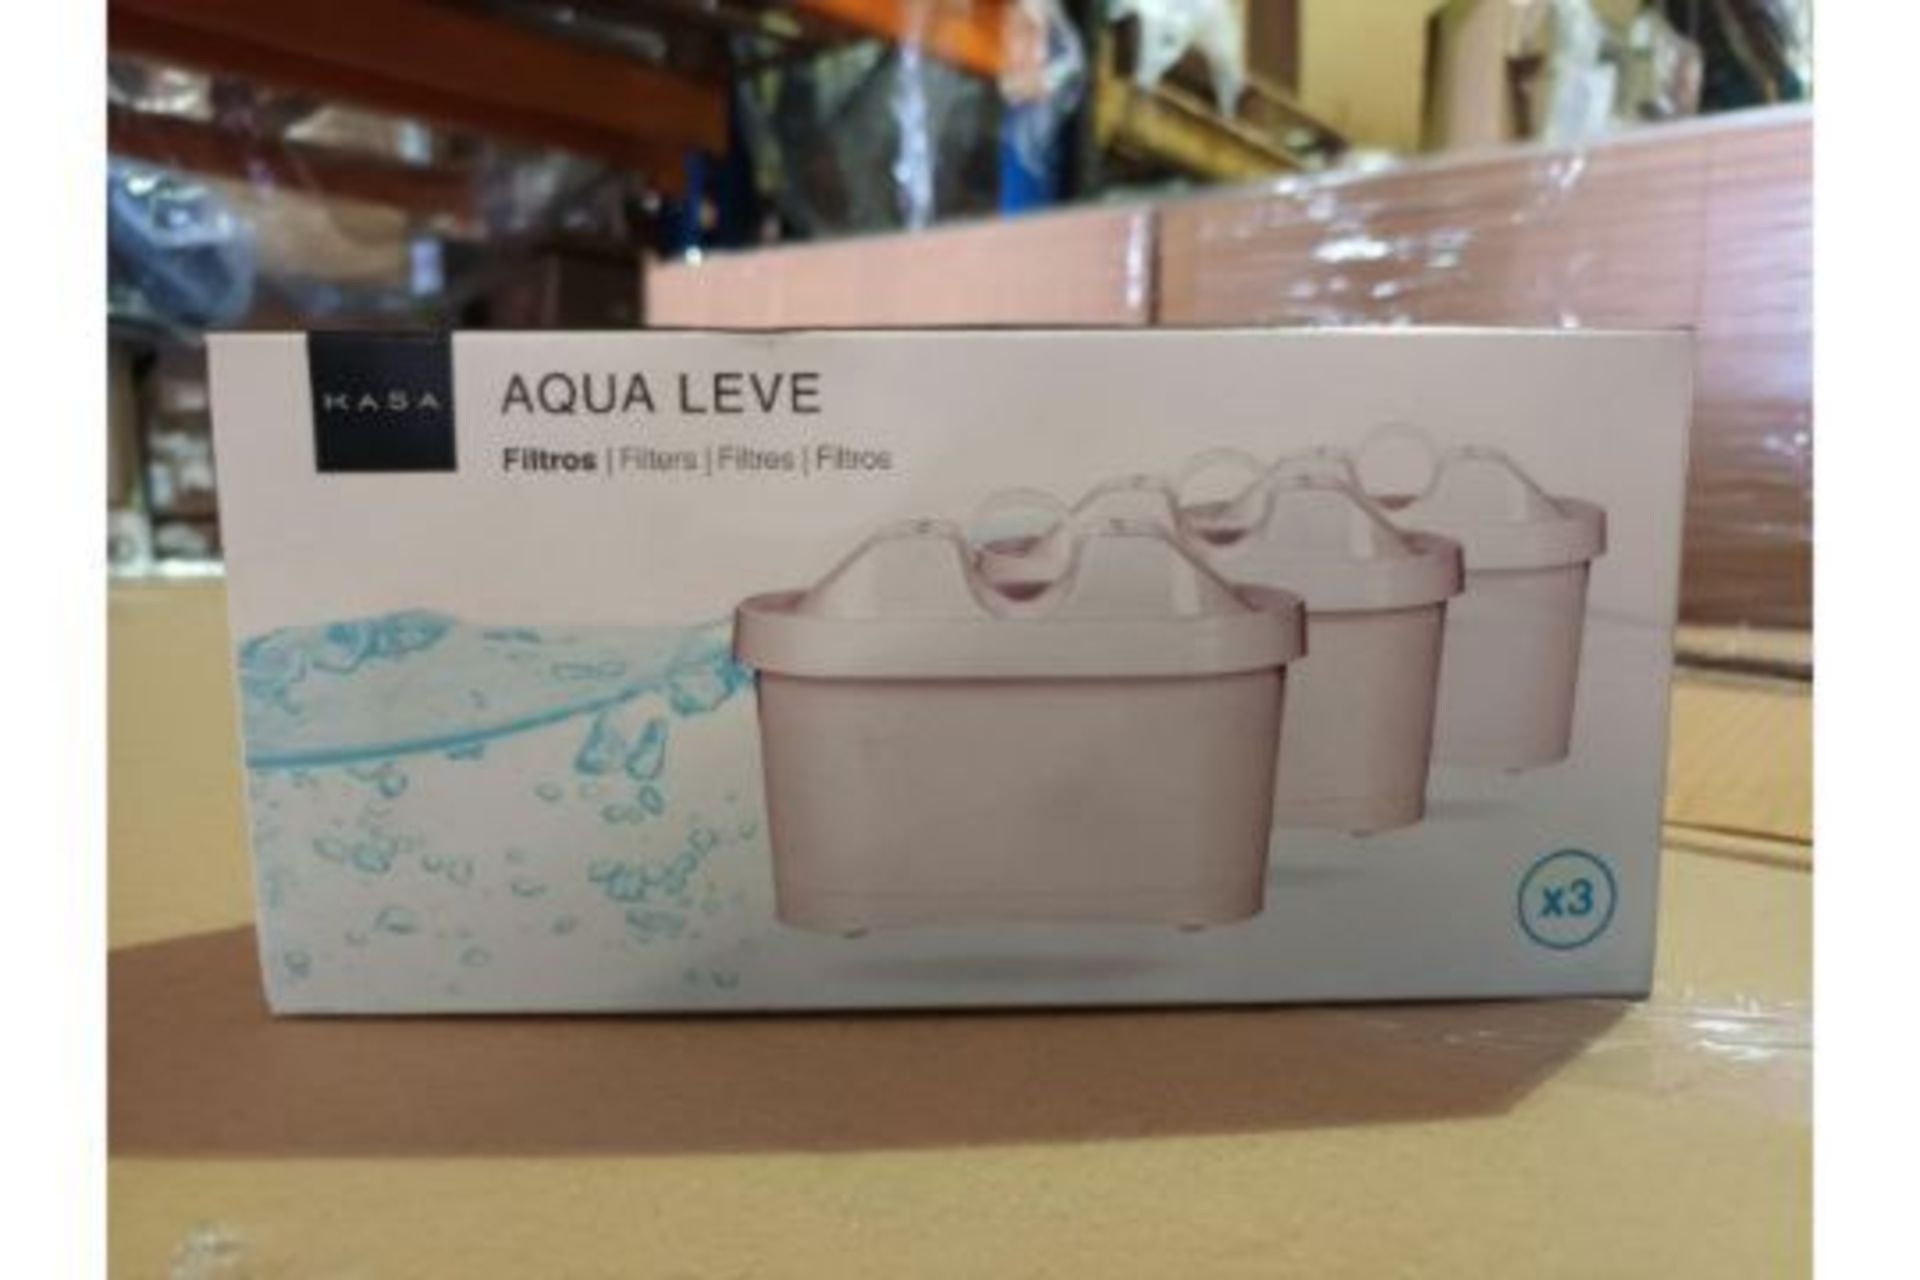 PALLET TO INCLUDE 60 x New Boxed Sets of 3 Kasa Aqua Leve Water Filters. (Total of 60 Filters Within